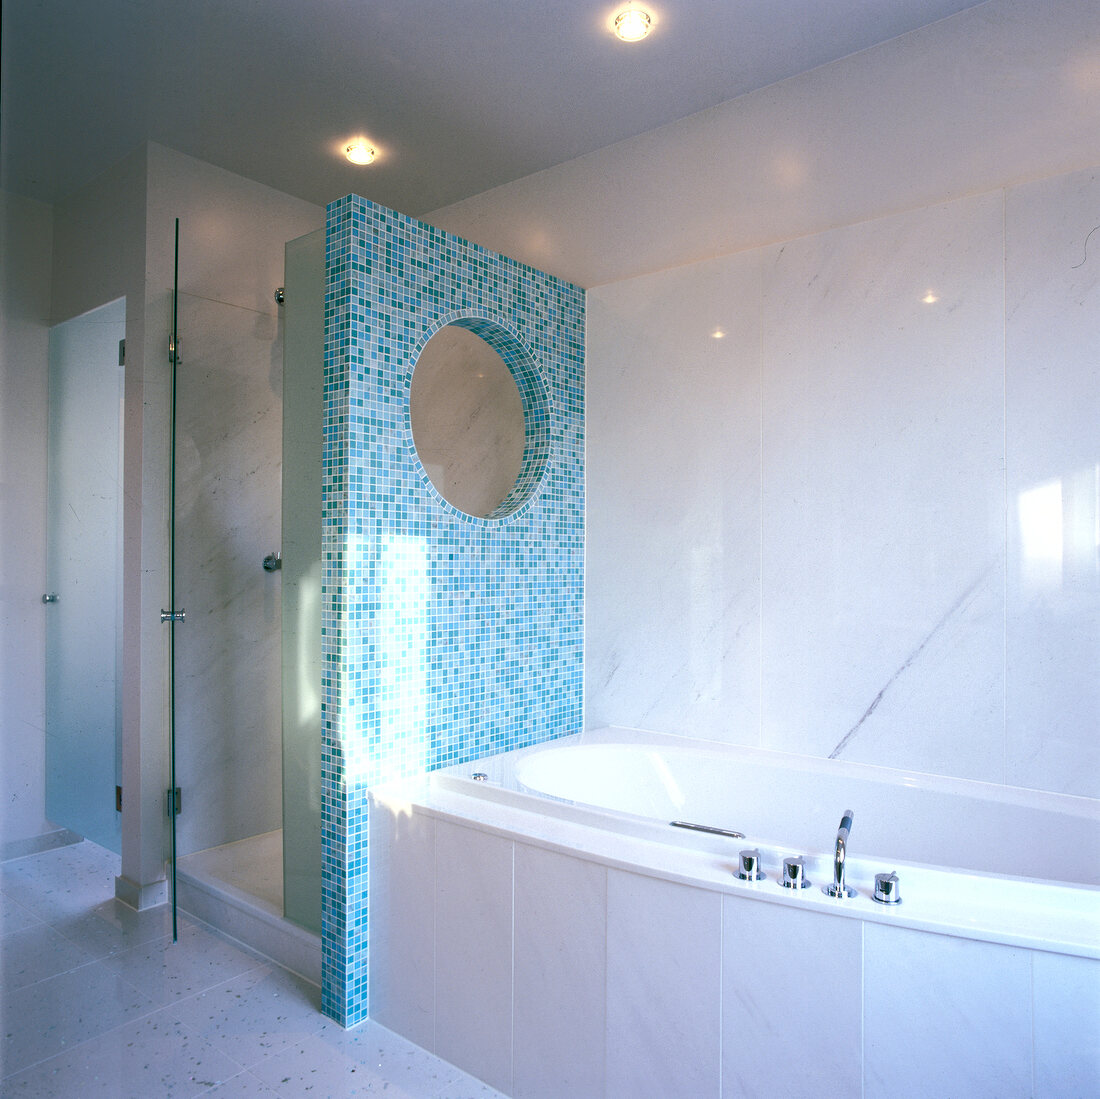 Turquoise mosaic partition between bath tub and shower